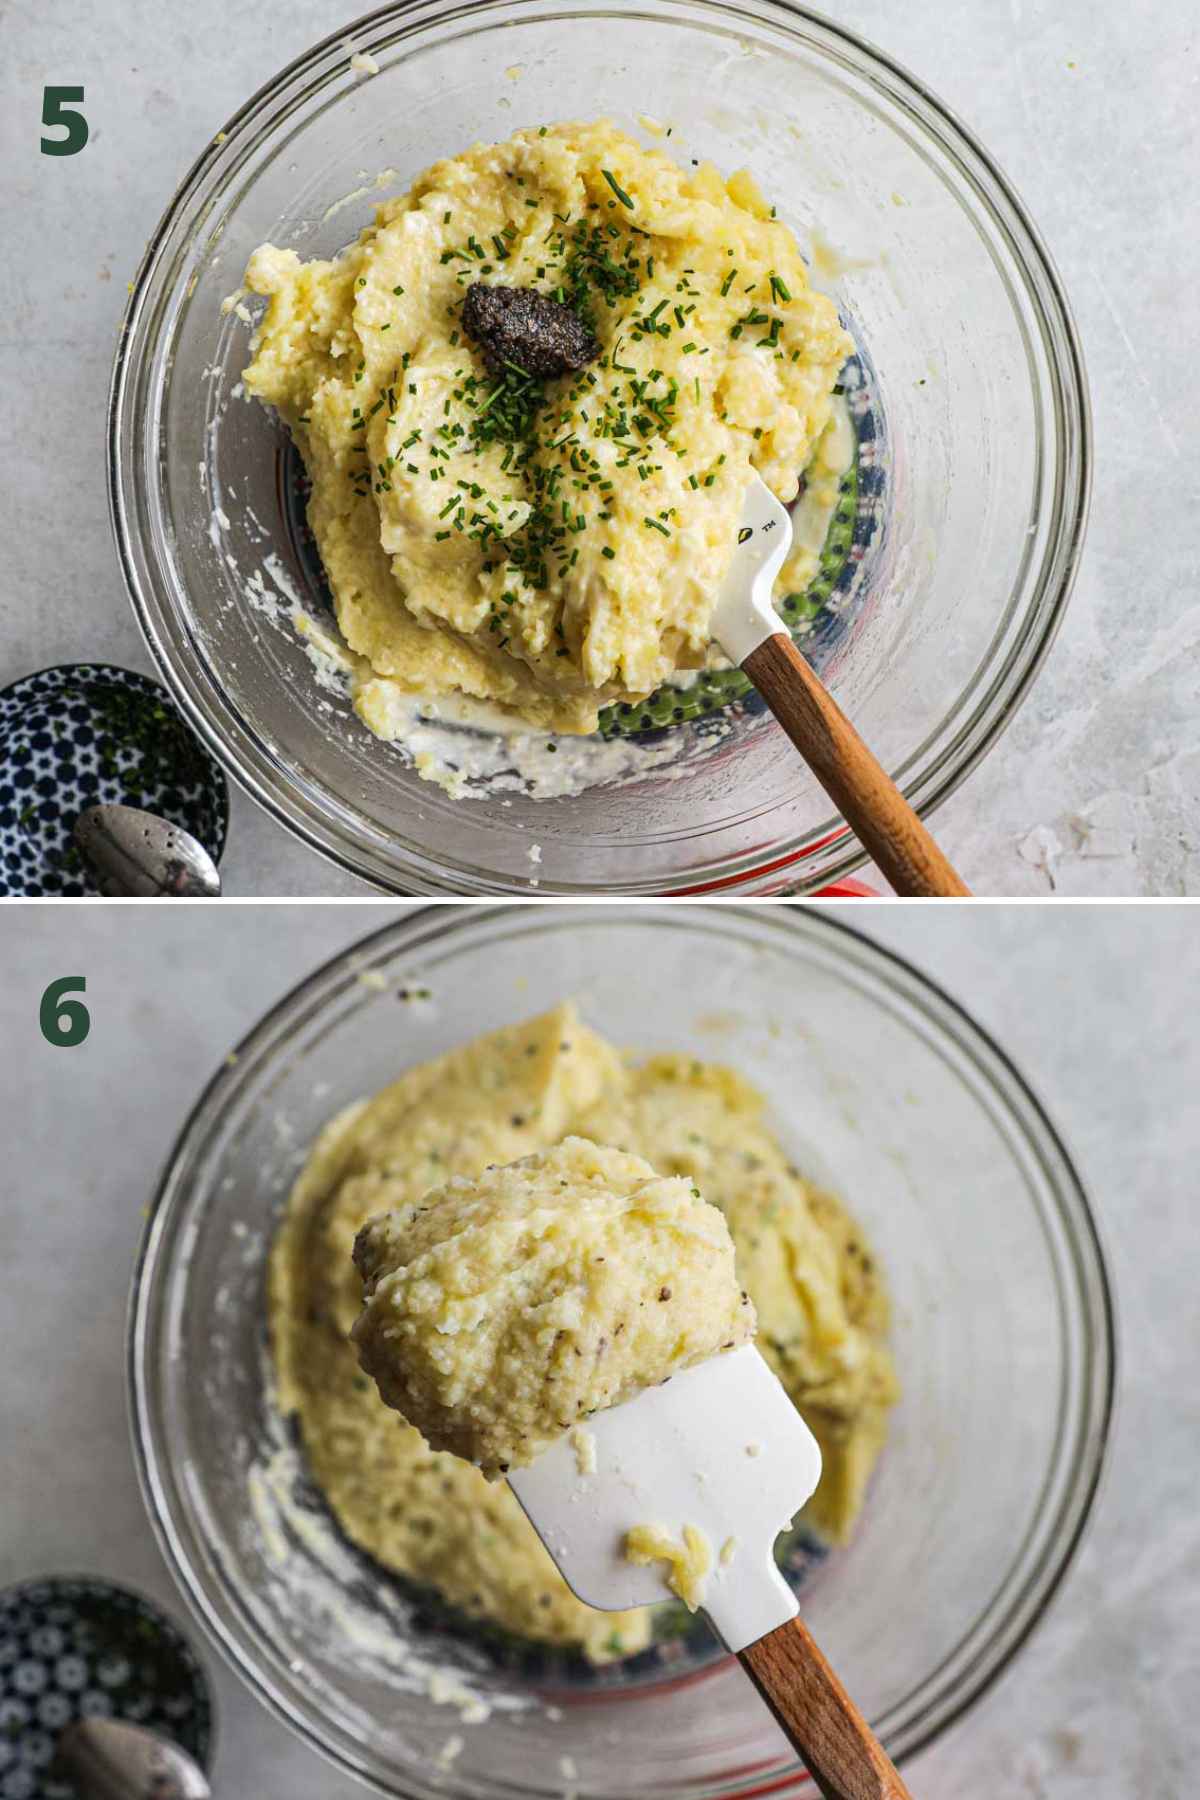 Steps to make truffle mashed potatoes, fold in truffle puree or oil and chives then serve.